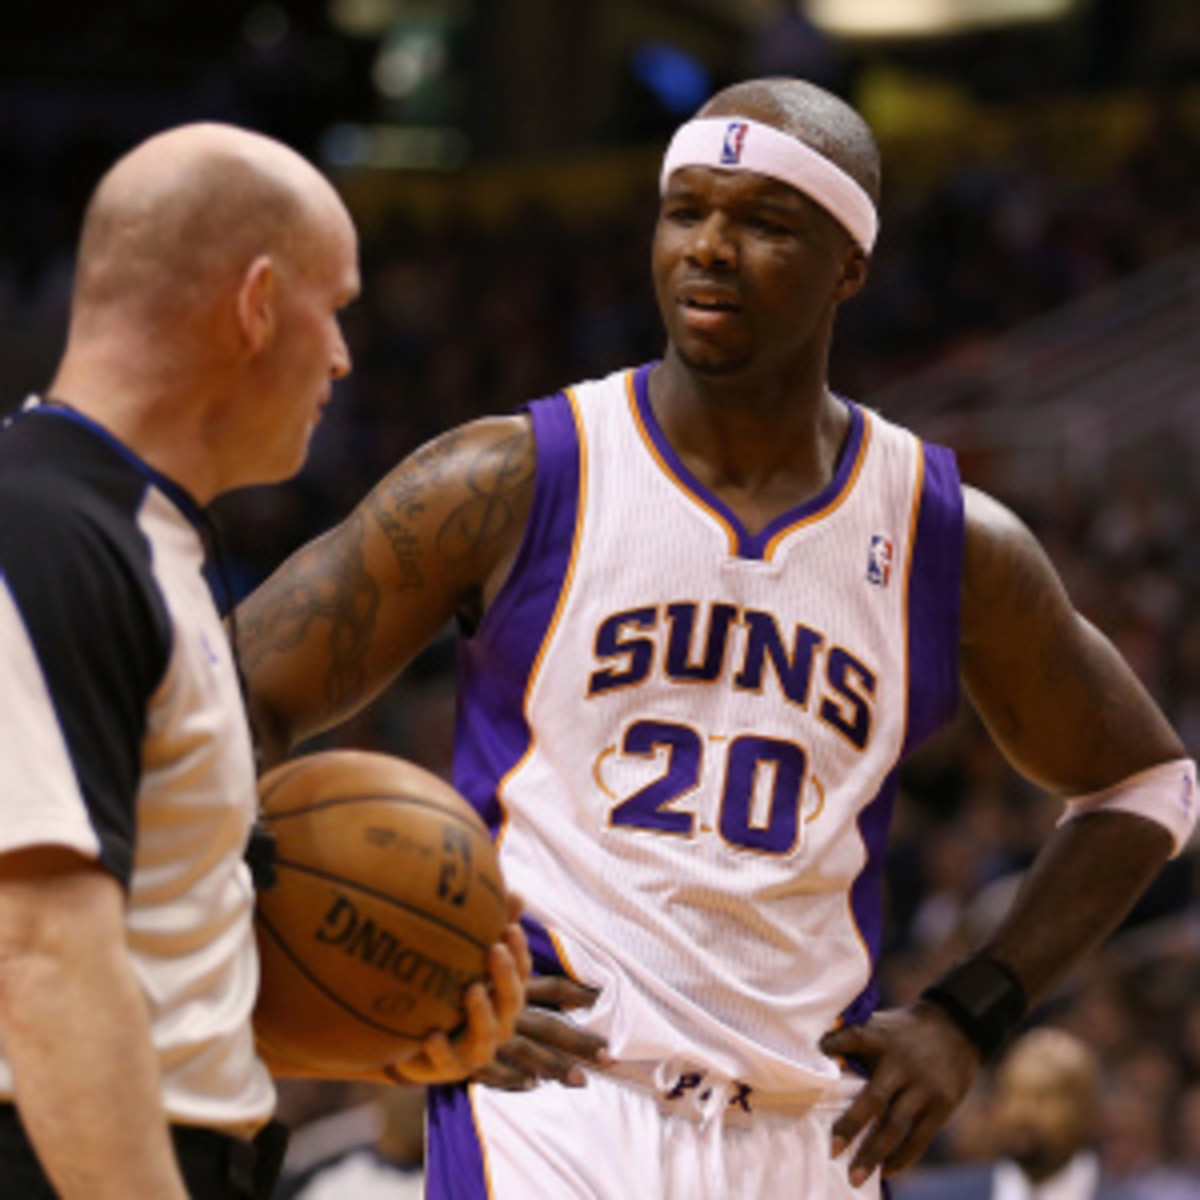 Jermaine O'Neal is out with an unstated medical condition. (Christian Petersen/Getty Images)